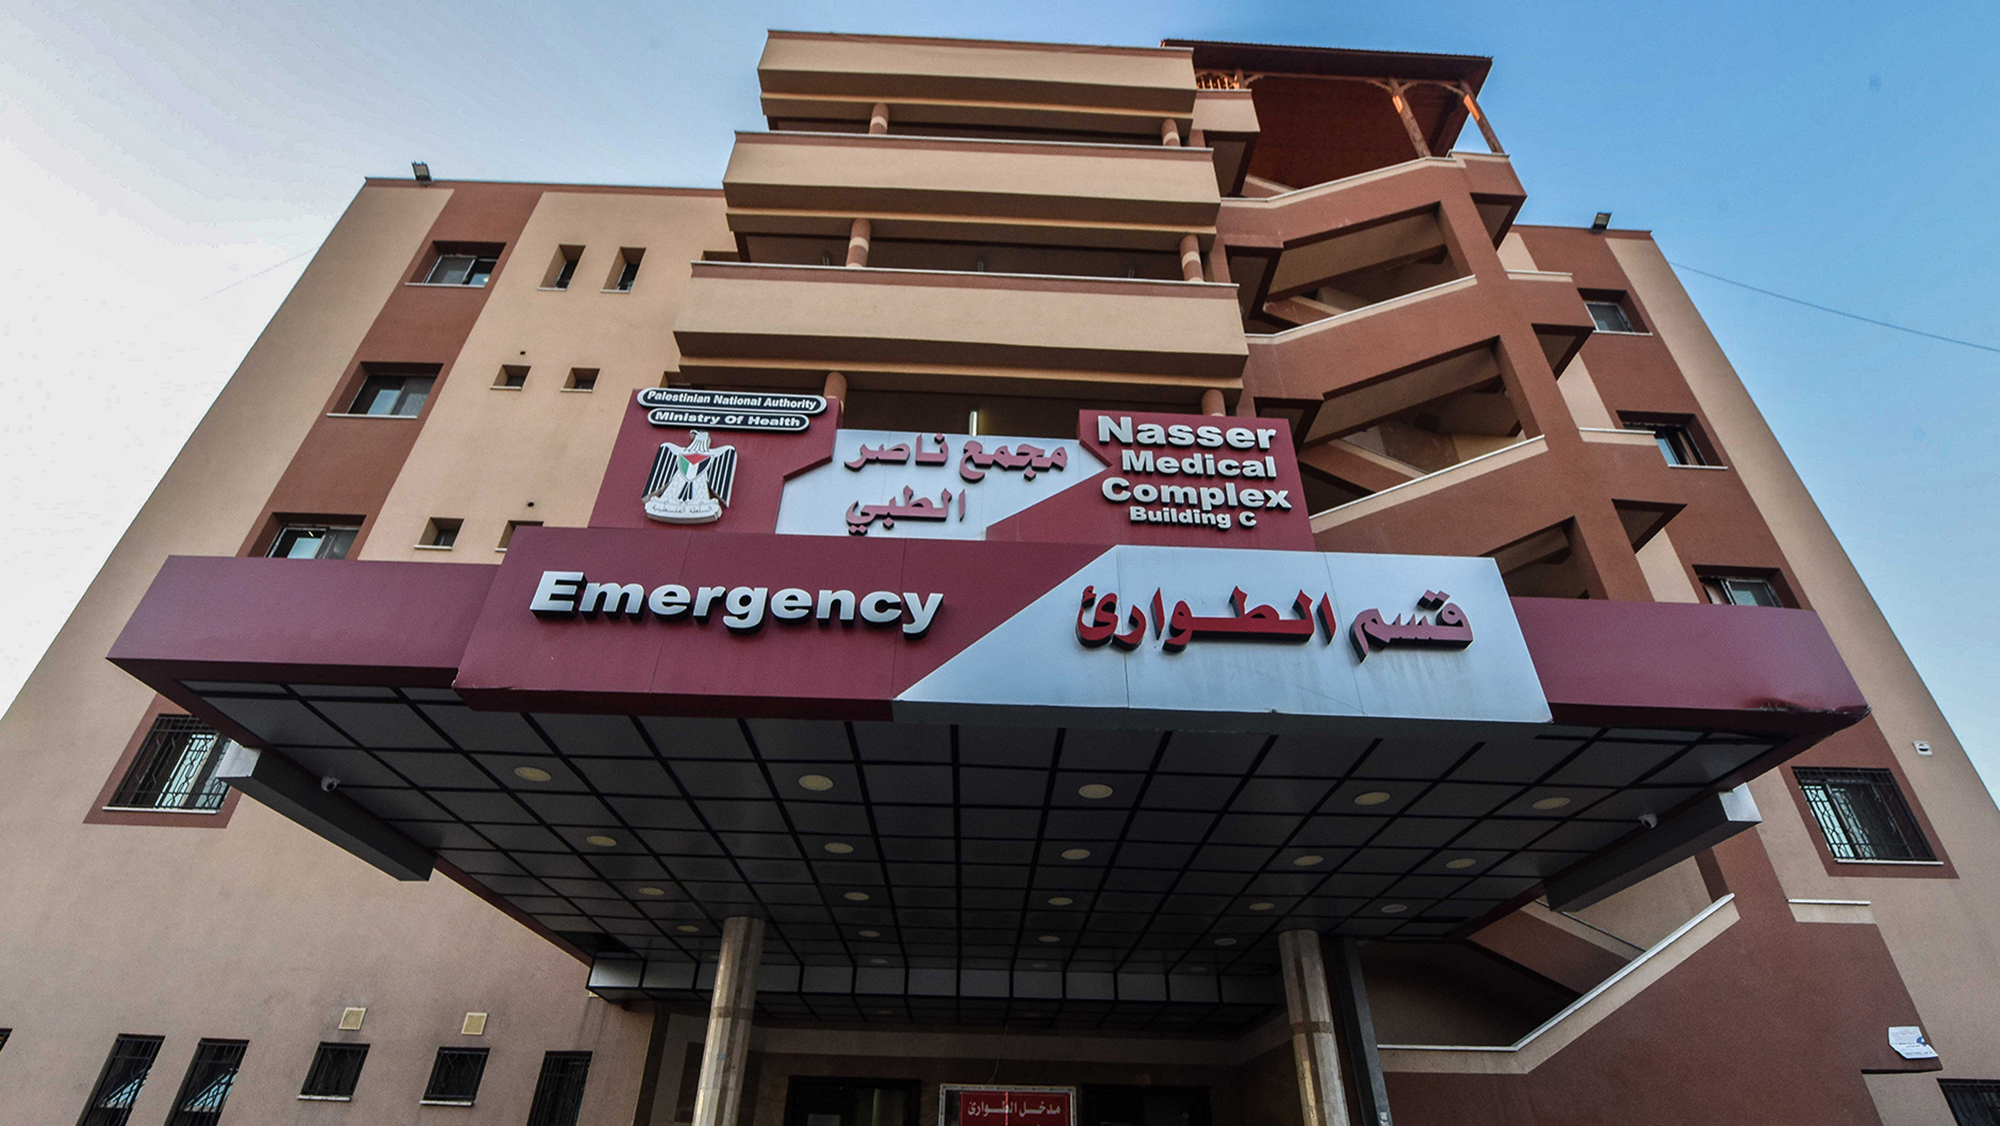 About 70 healthcare workers arrested in Israeli raid on Nasser hospital, Gaza’s health ministry says